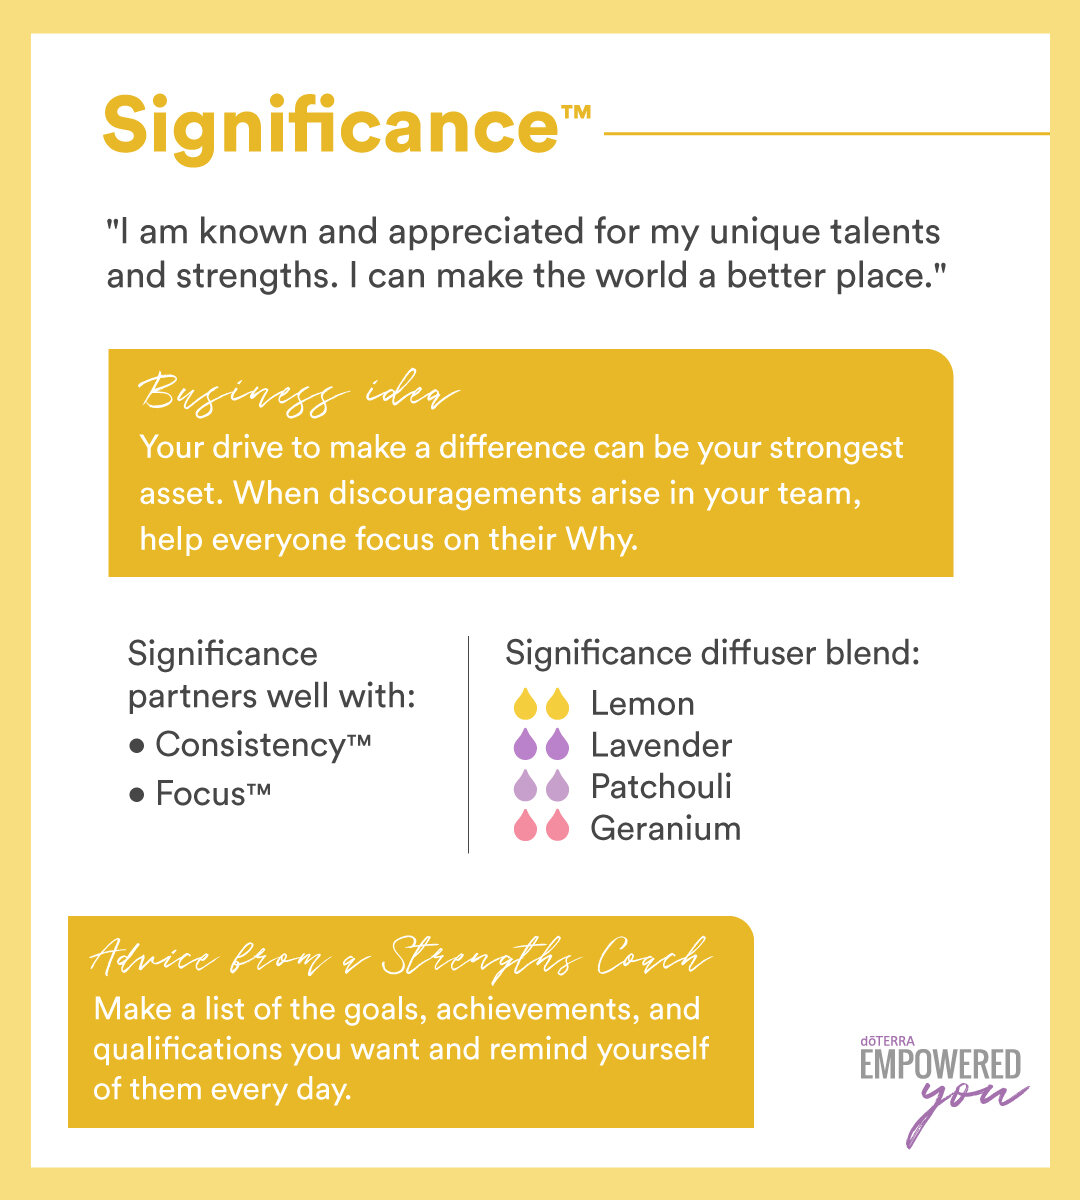 Strengths and oils-insight-Signifigance.jpg